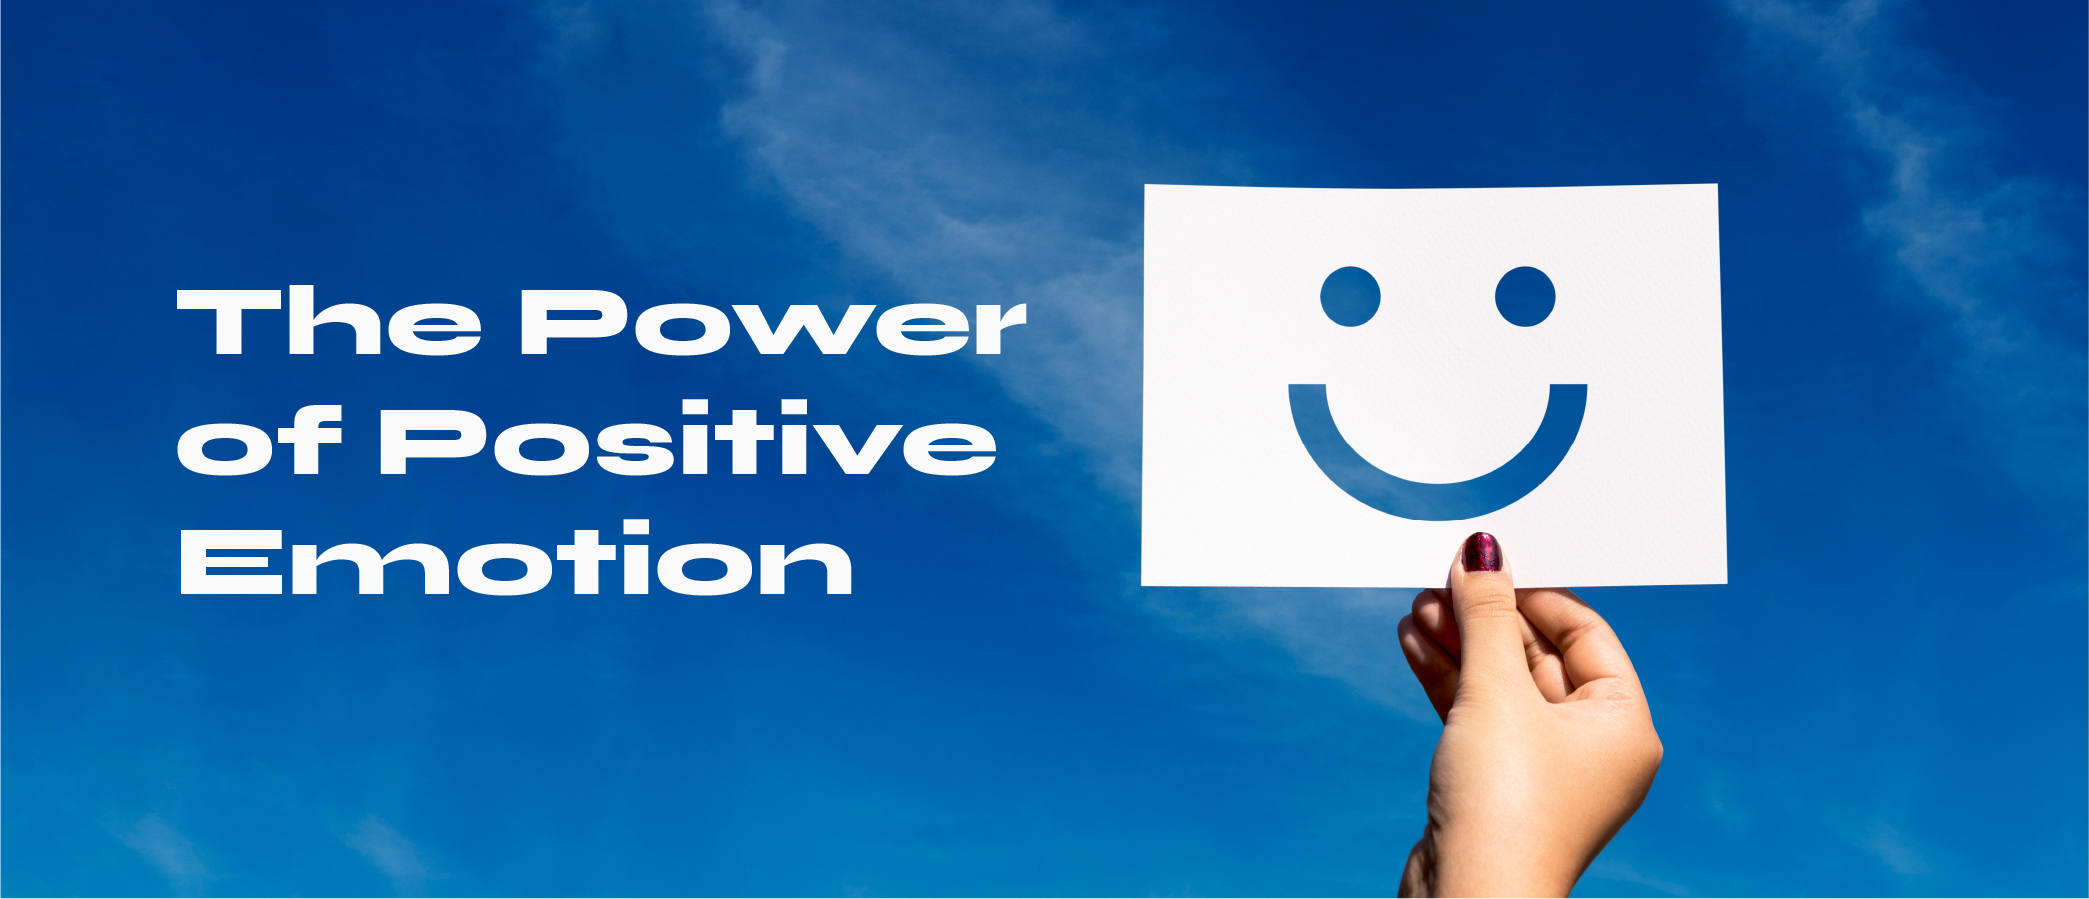 the power of Positive Emotion 